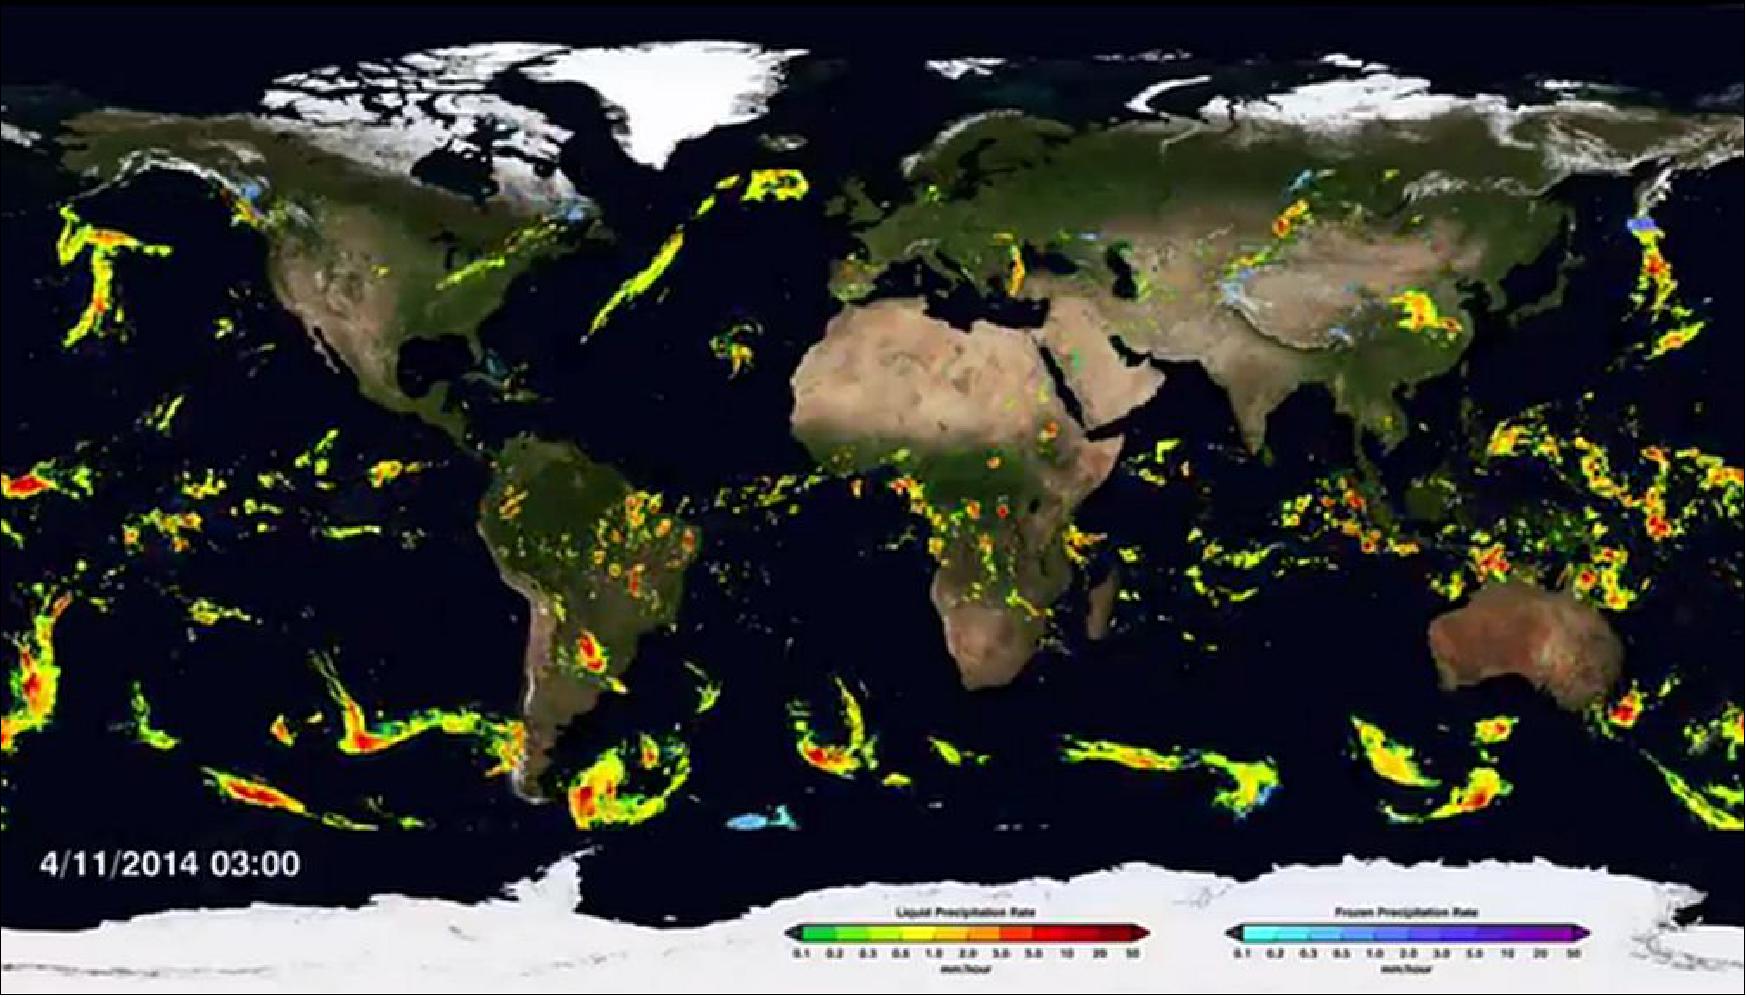 Figure 58: The GPM mission produced its first global rainfall & snowfall map from April to September 2014 (image credit: NASA/GSFC, the video can be seen in Ref. 94)